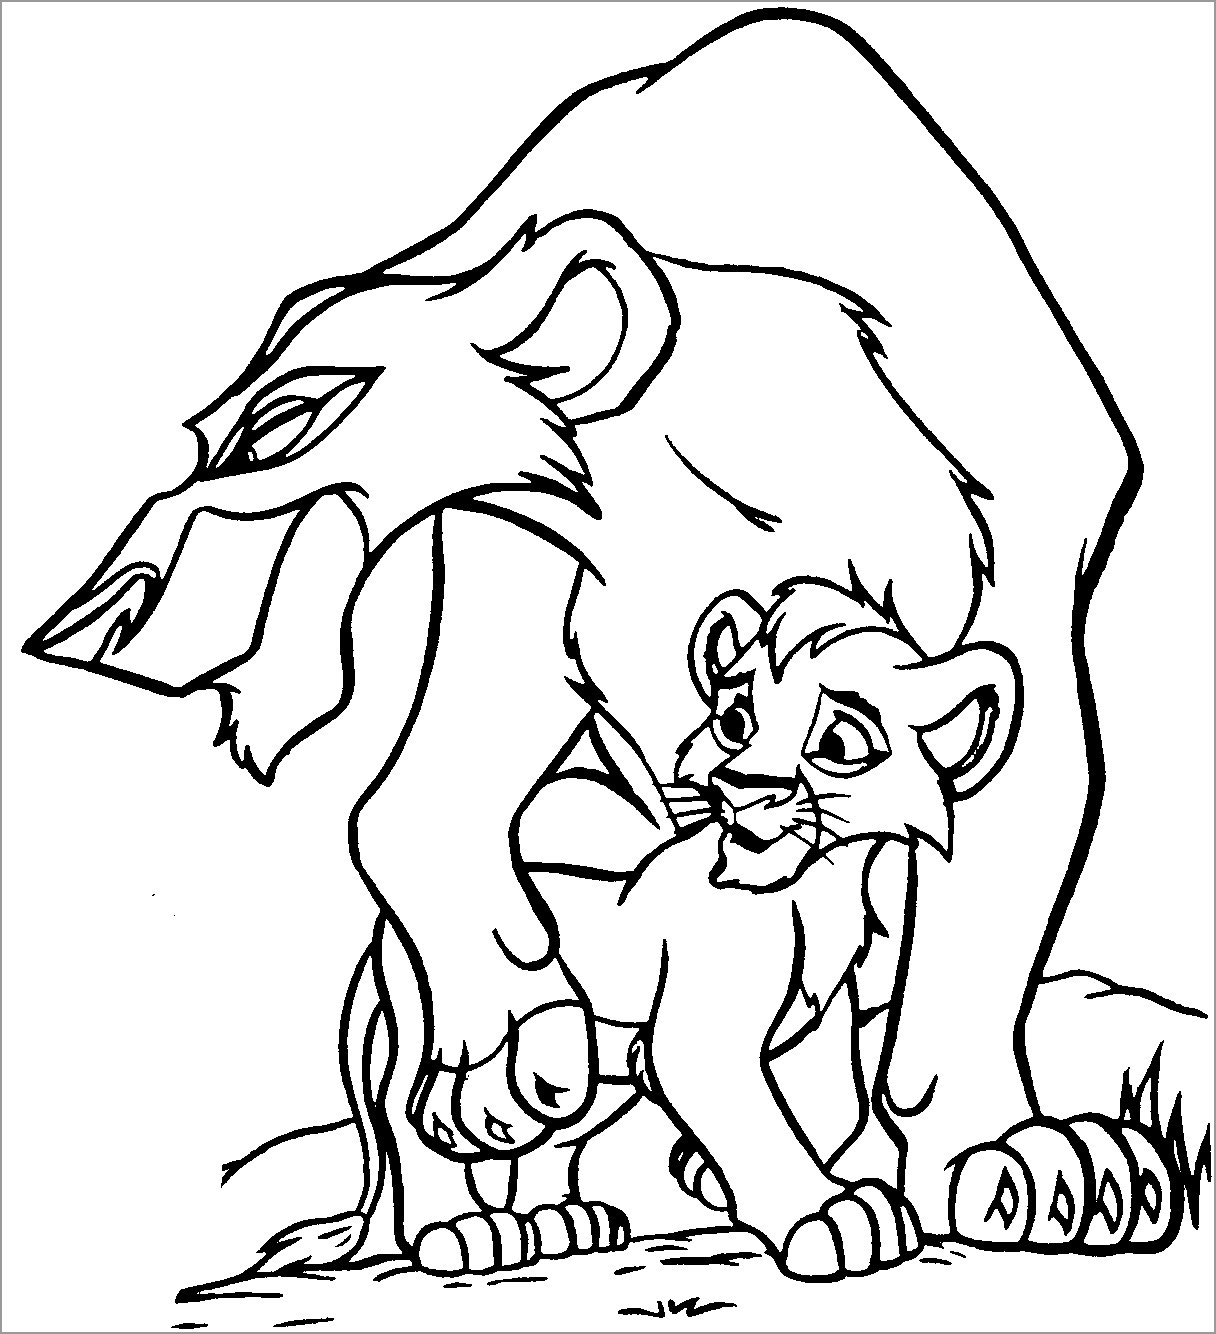 Lion Moms and Baby Coloring Page